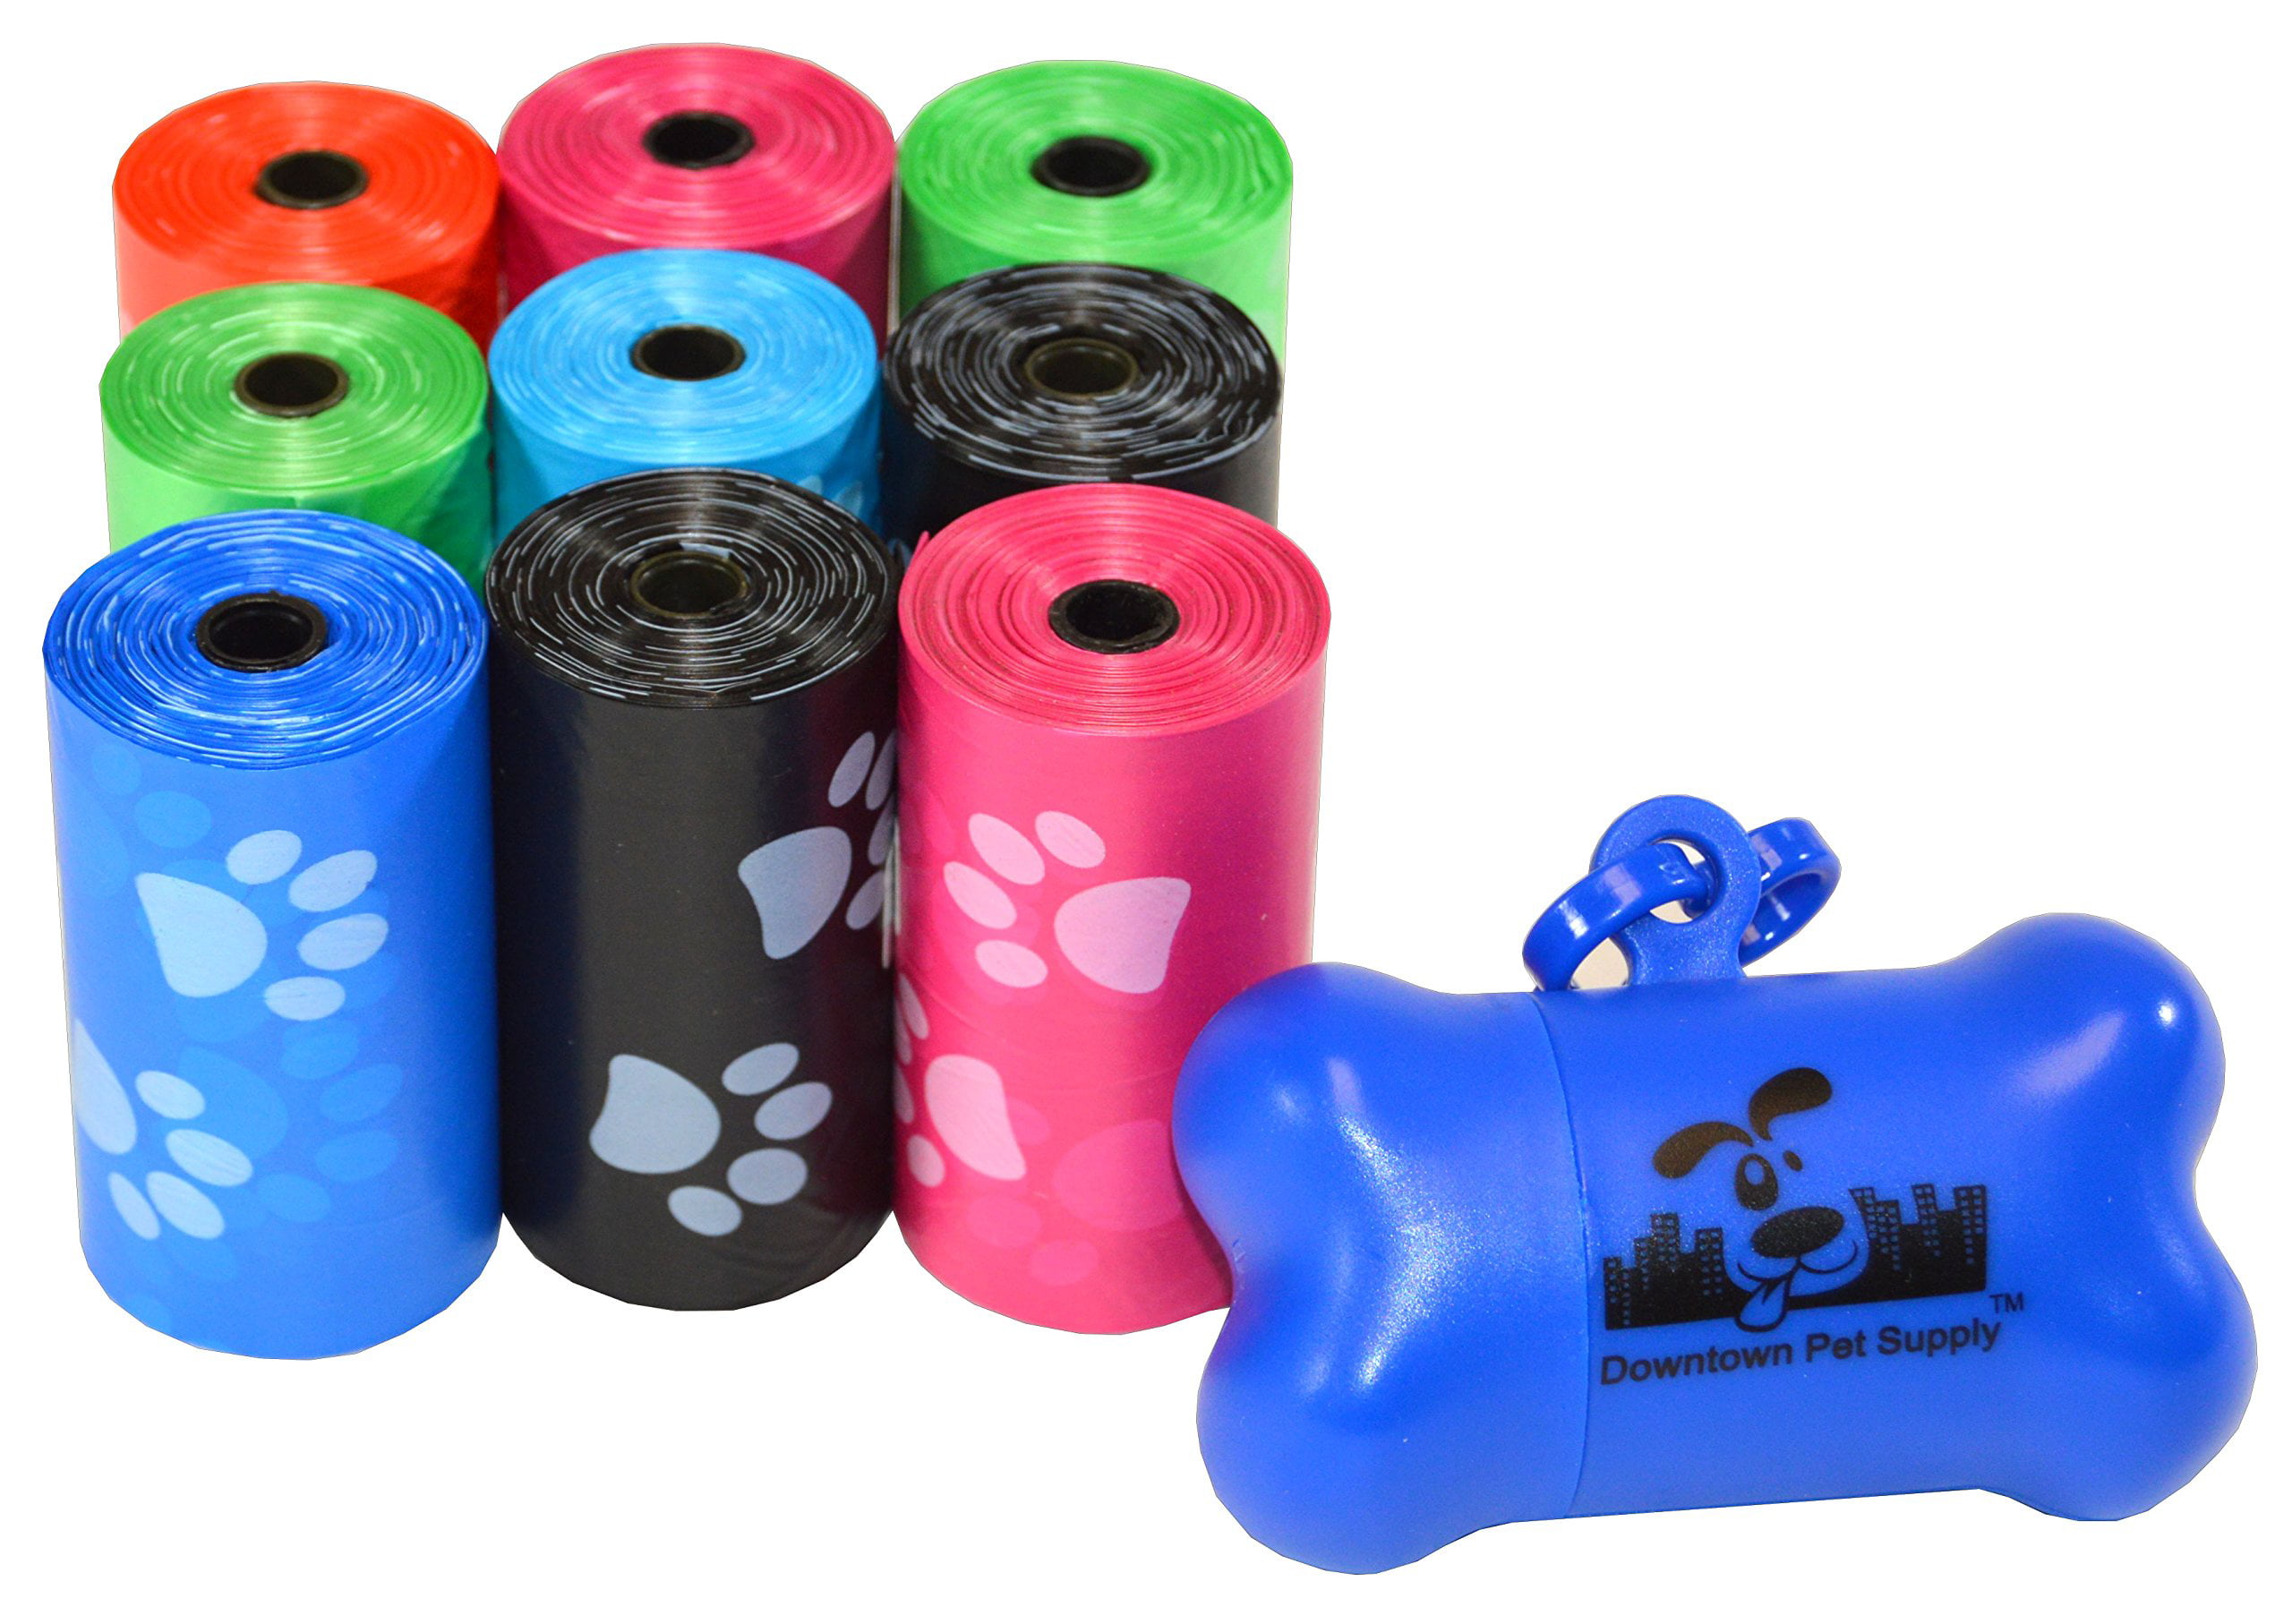 poop bags for dogs